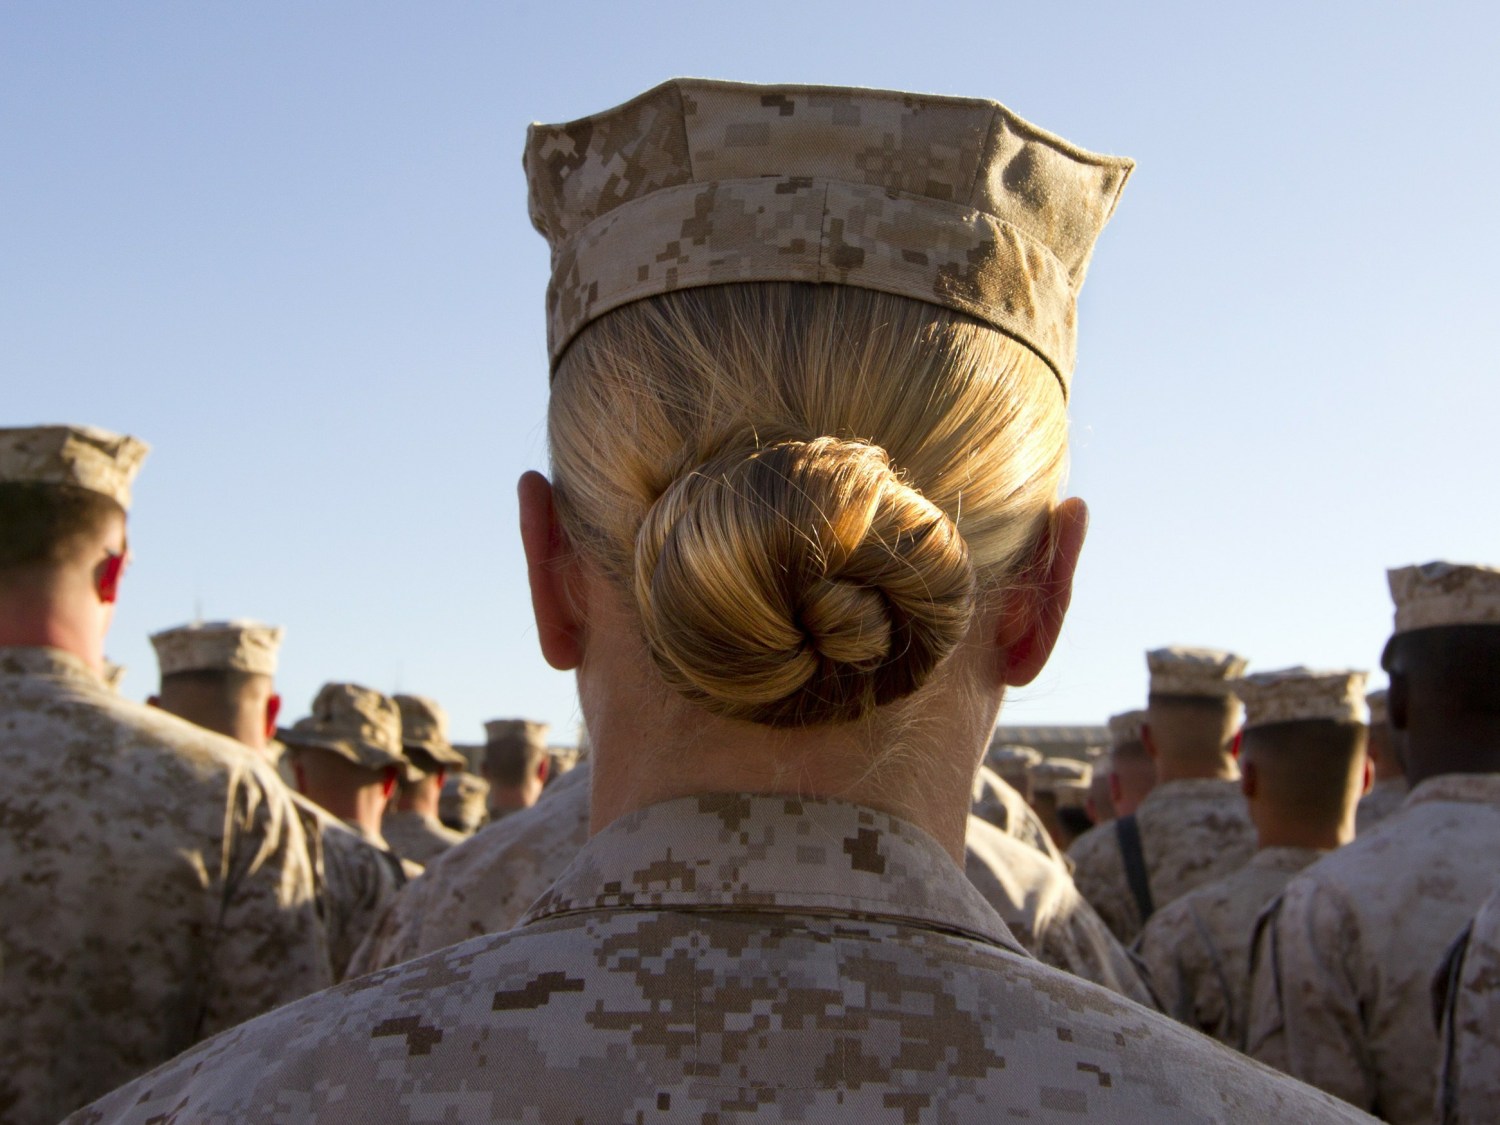 Women In Military Uniform Porn - Nude Photo Posts of Female Marines Being Investigated by NCIS